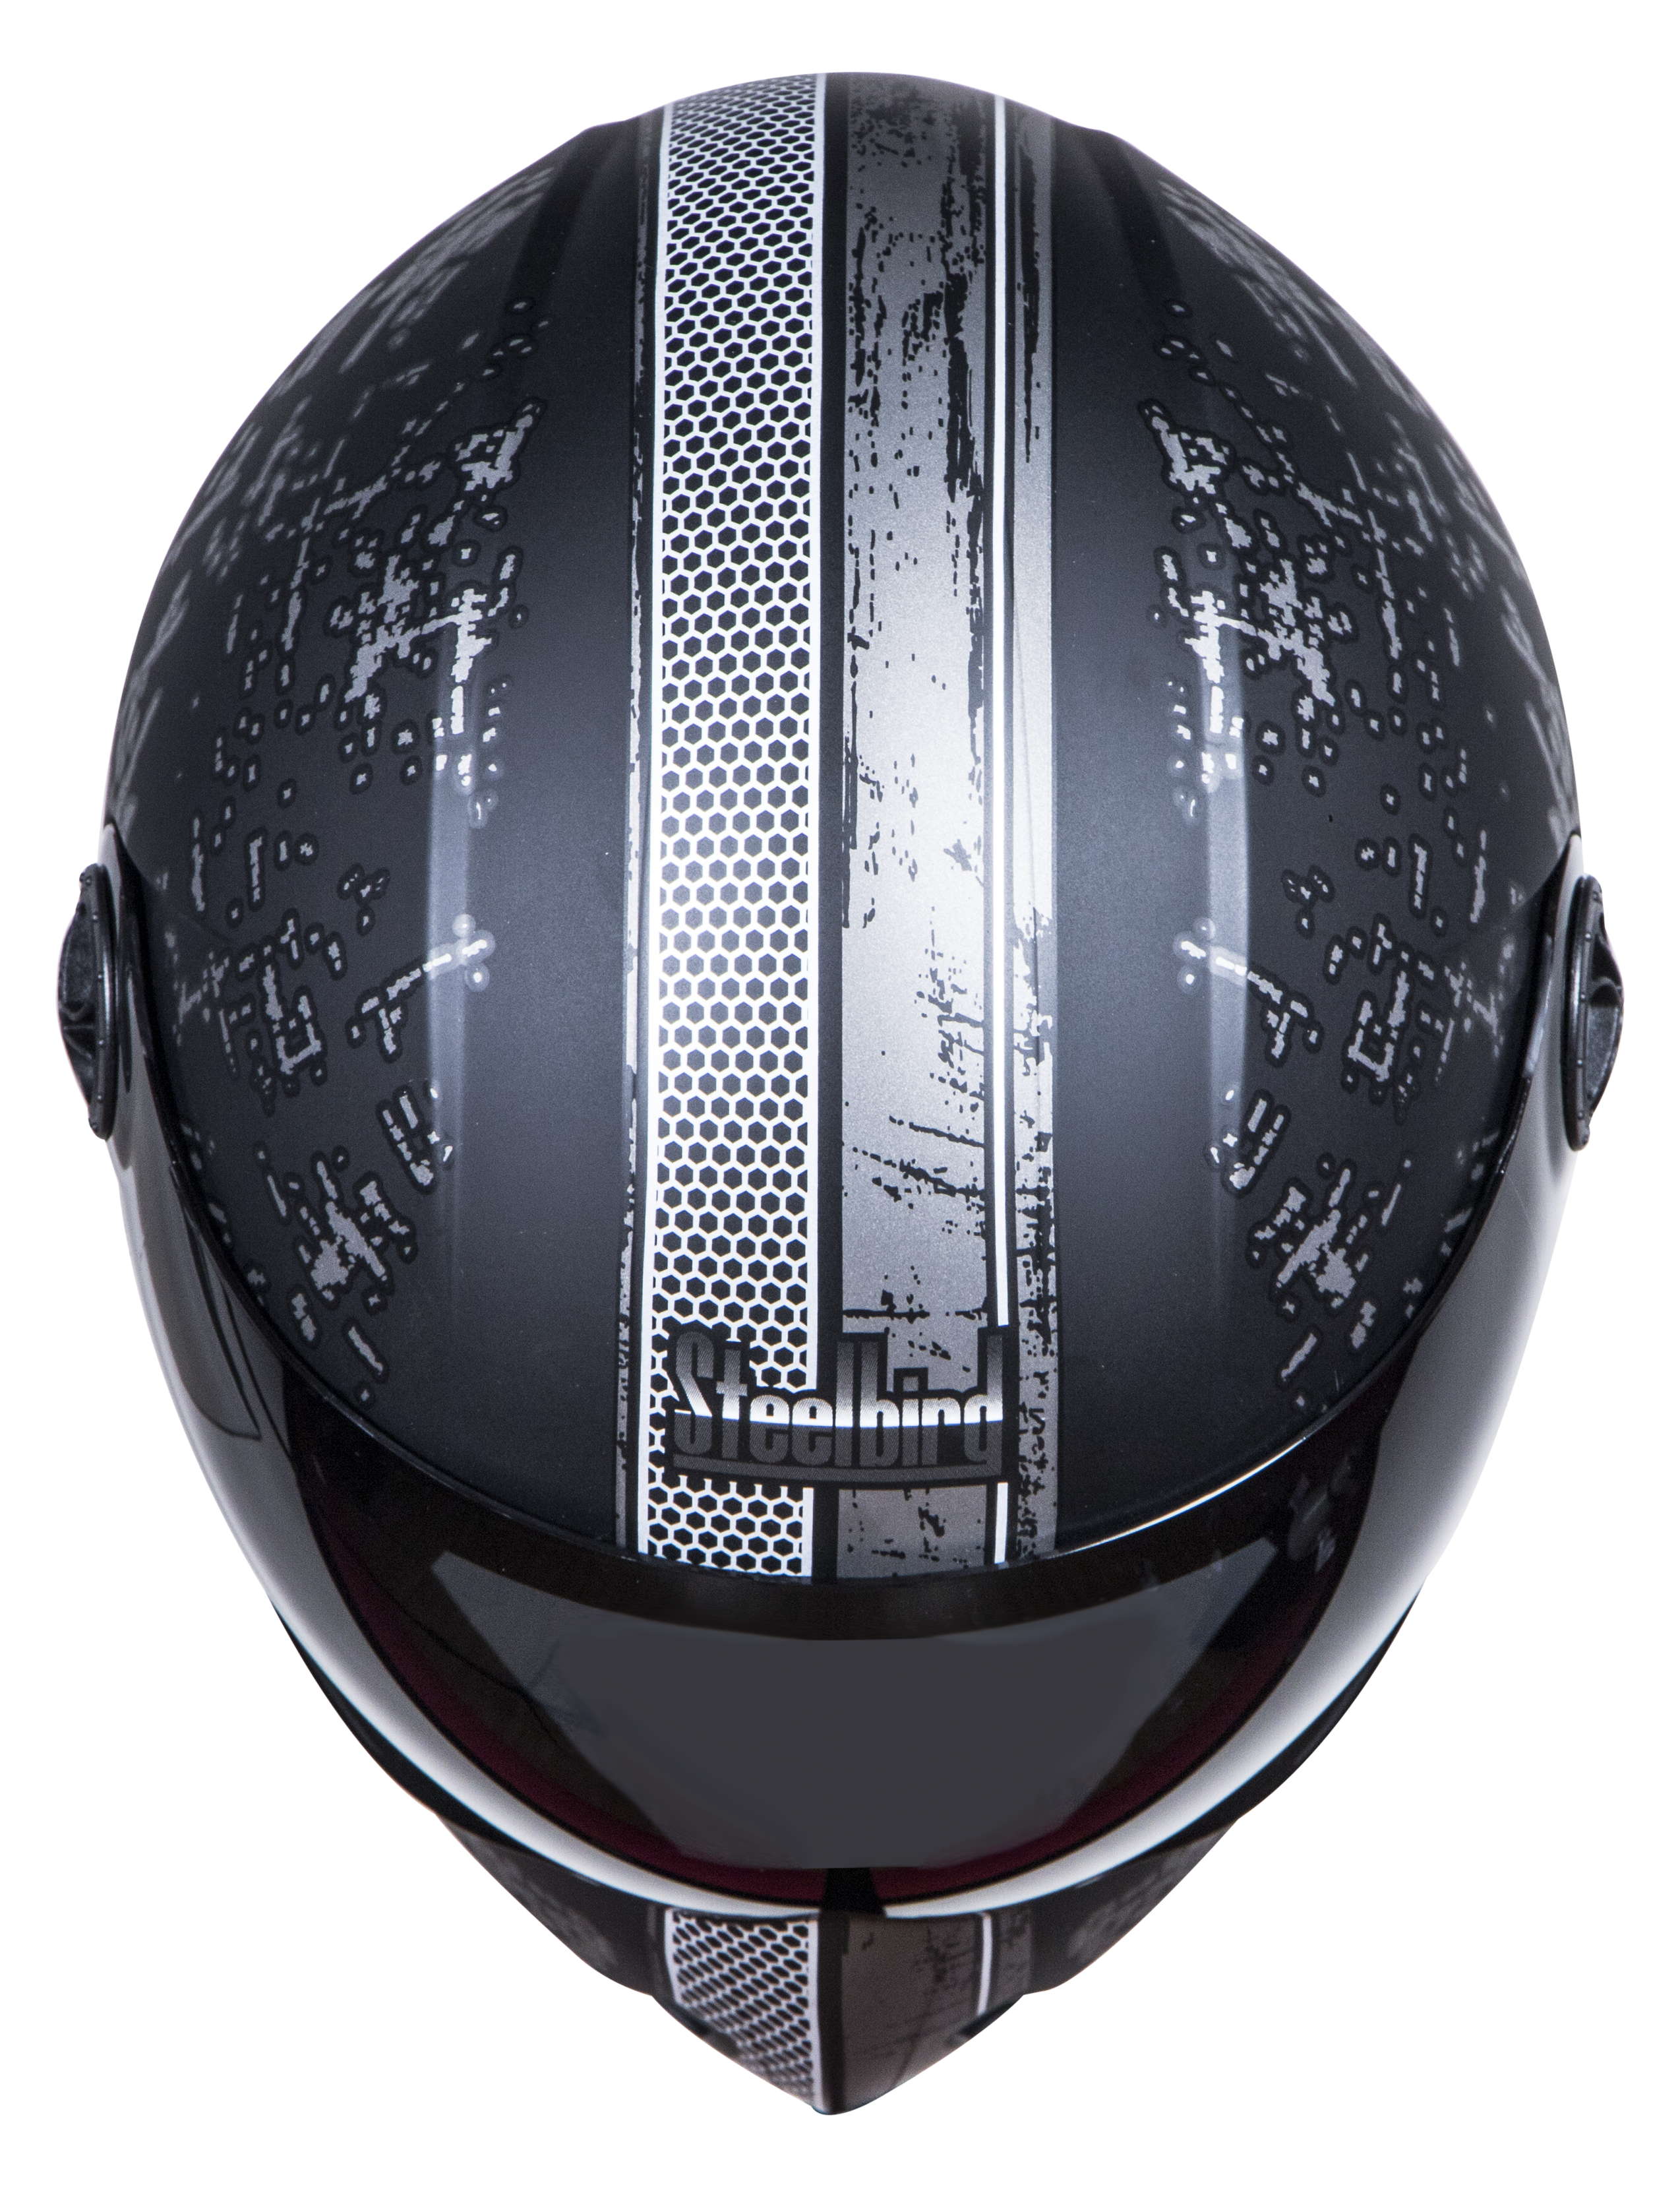 SBH-1 Adonis R2K Glossy Black With Grey( Fitted With Clear Visor Extra Smoke Visor Free)